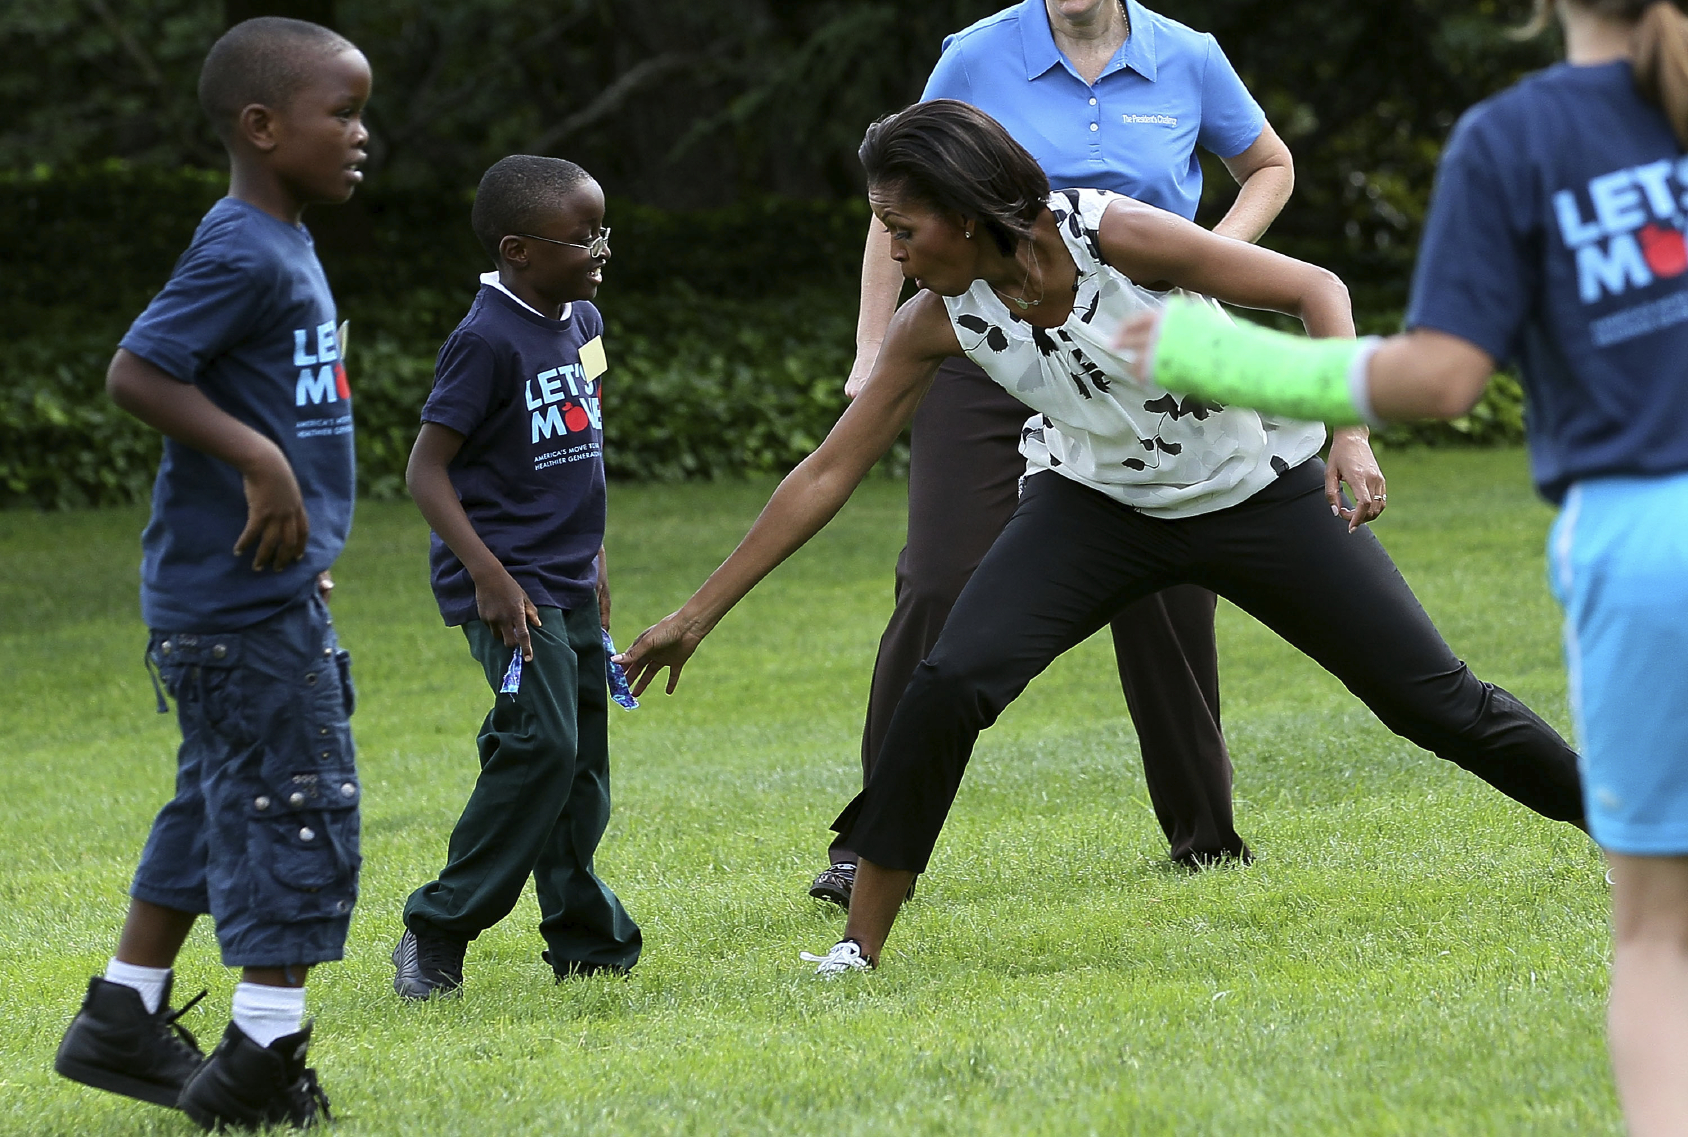 Michelle Obama Kicks Off South Lawn Series Of Summer Activities For Kids